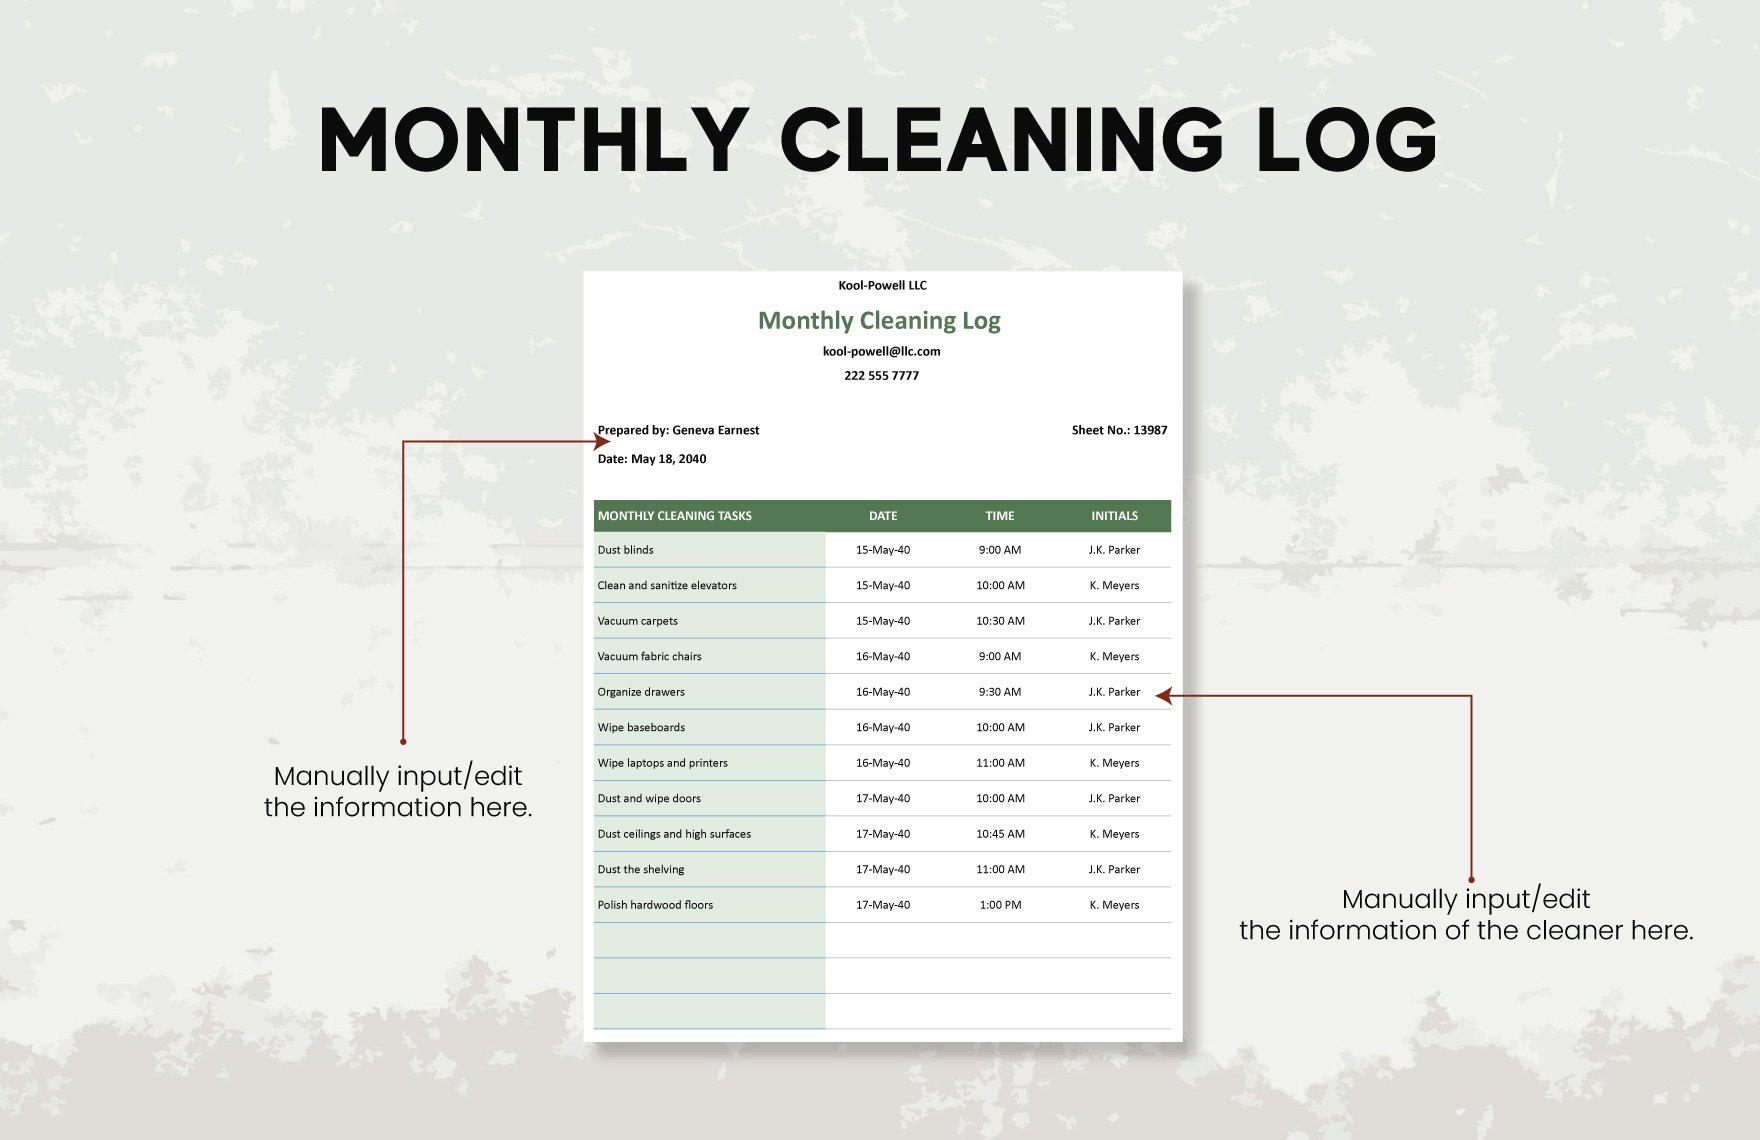 Monthly Cleaning Log Template